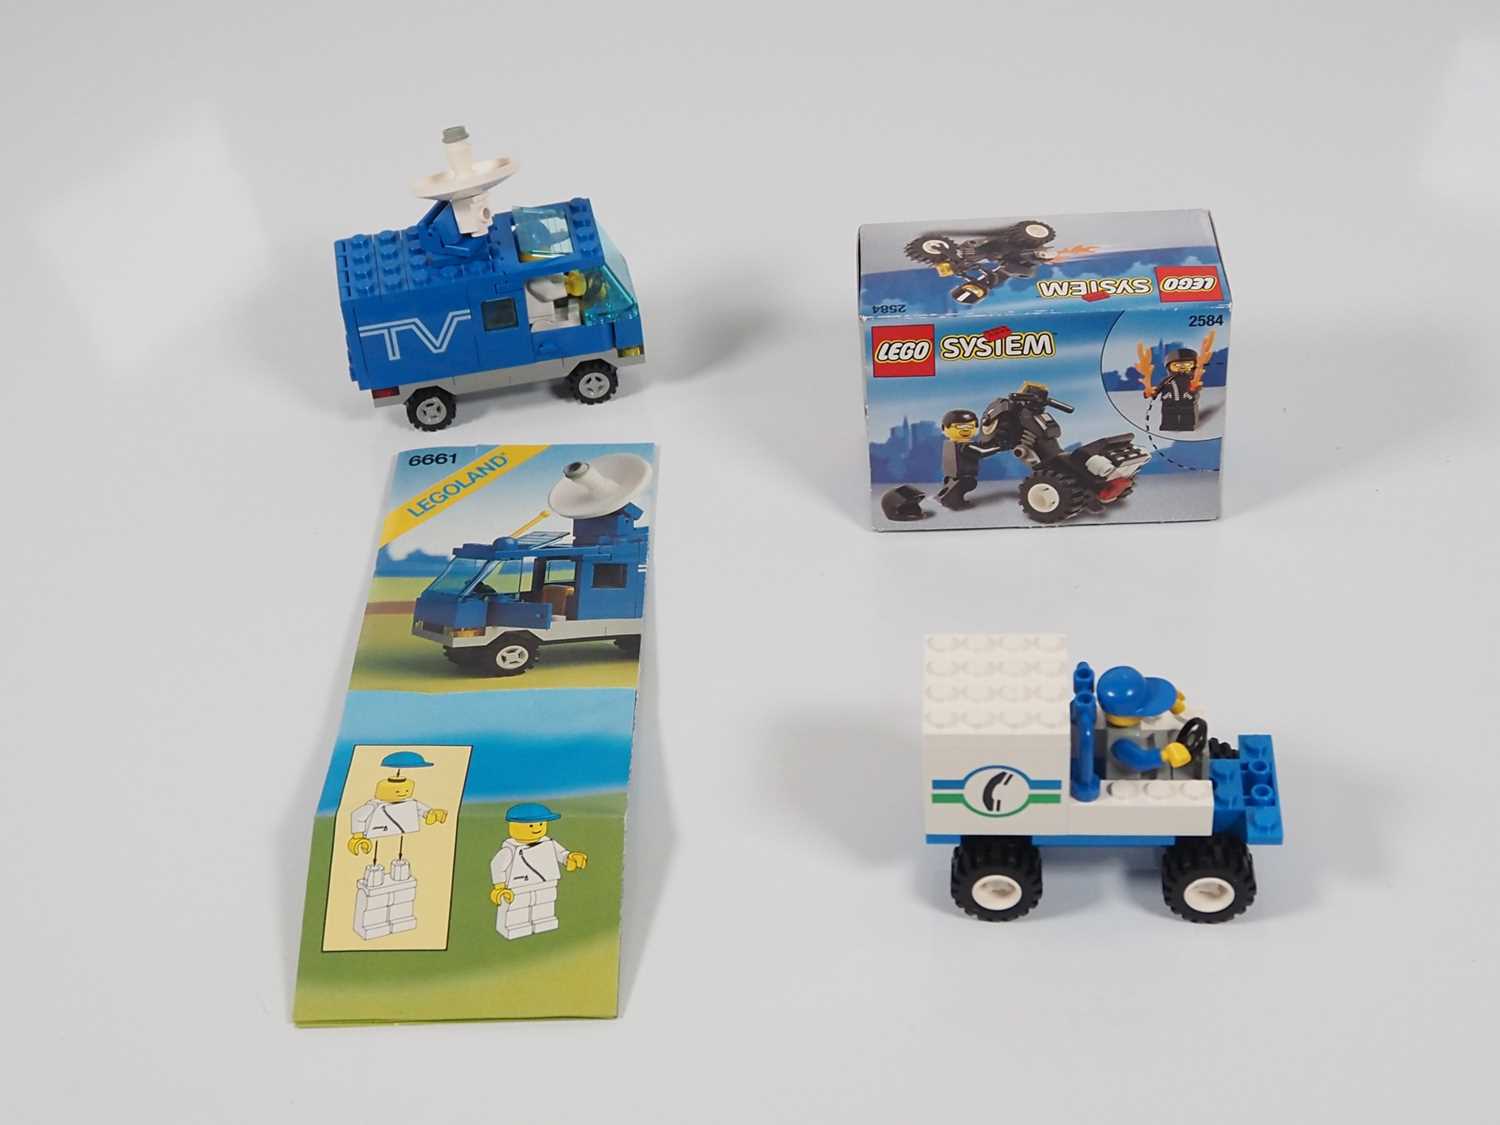 LEGO - A selection of vintage Lego vehicles to include #6661, #6693 and #2584 which is in a sealed - Image 3 of 4